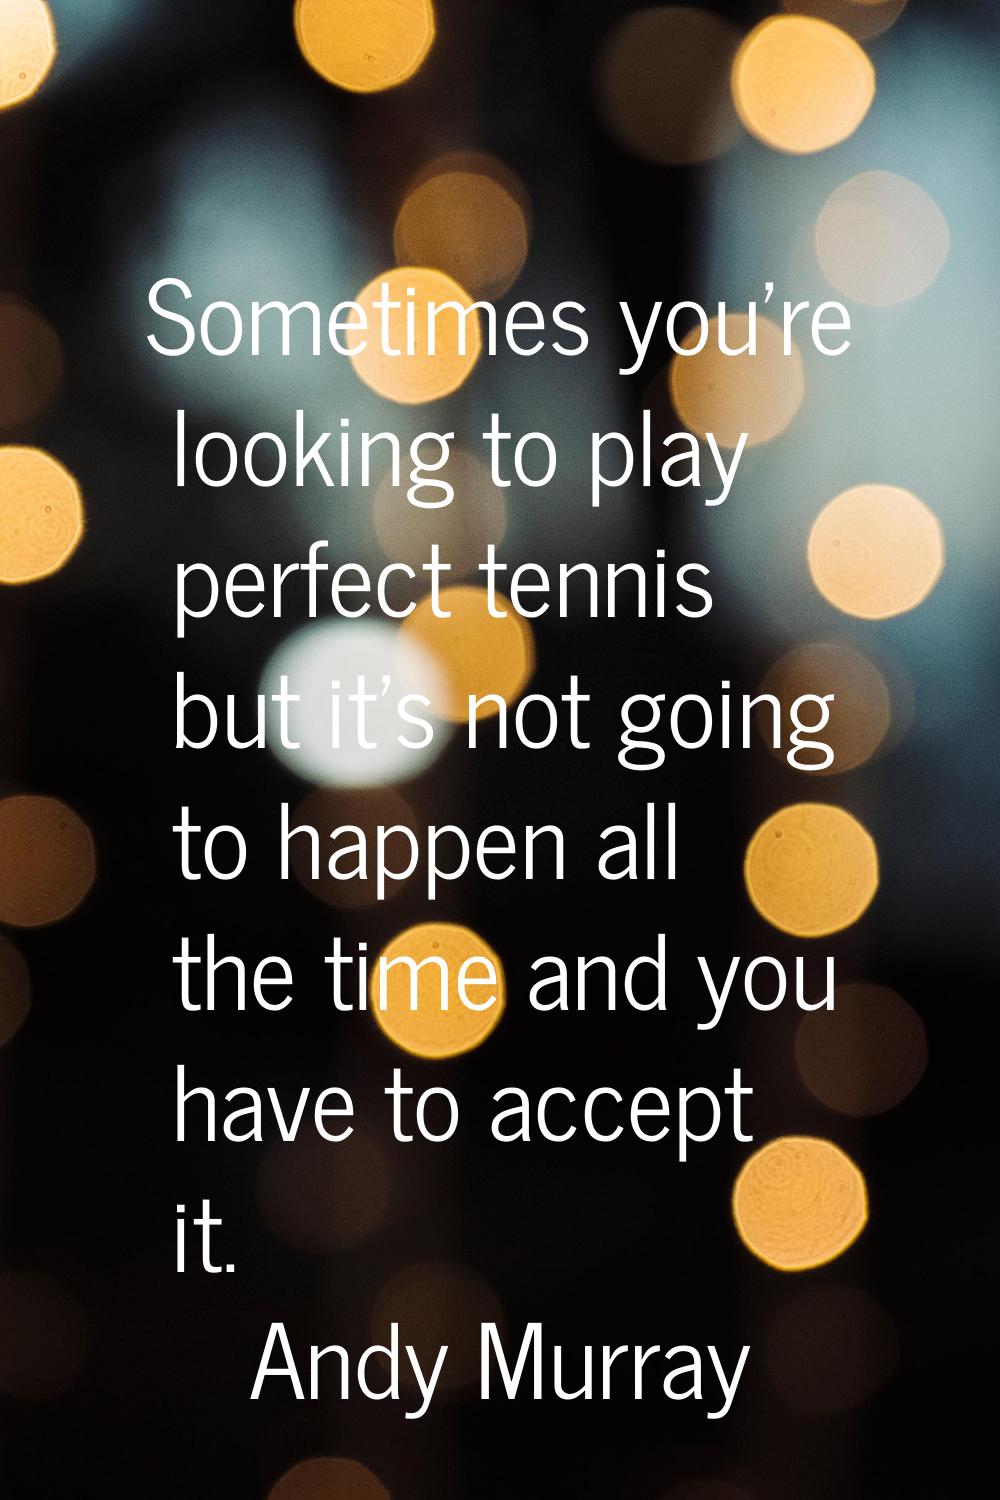 Sometimes you're looking to play perfect tennis but it's not going to happen all the time and you h